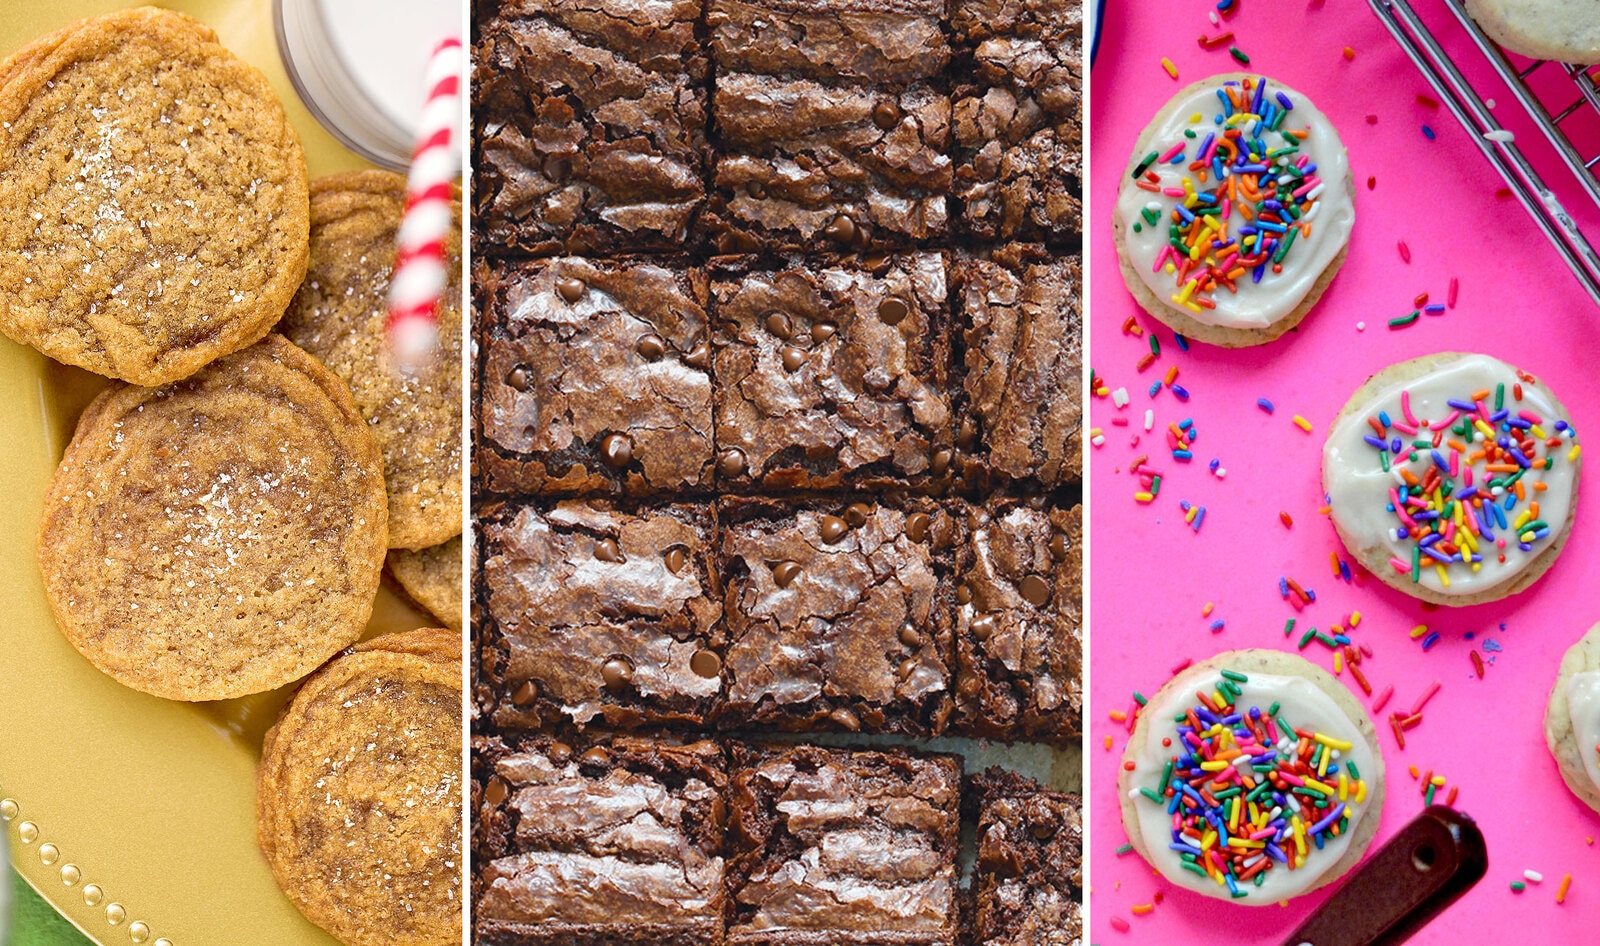 25 Most Popular Vegan Desserts to Make Before You Die